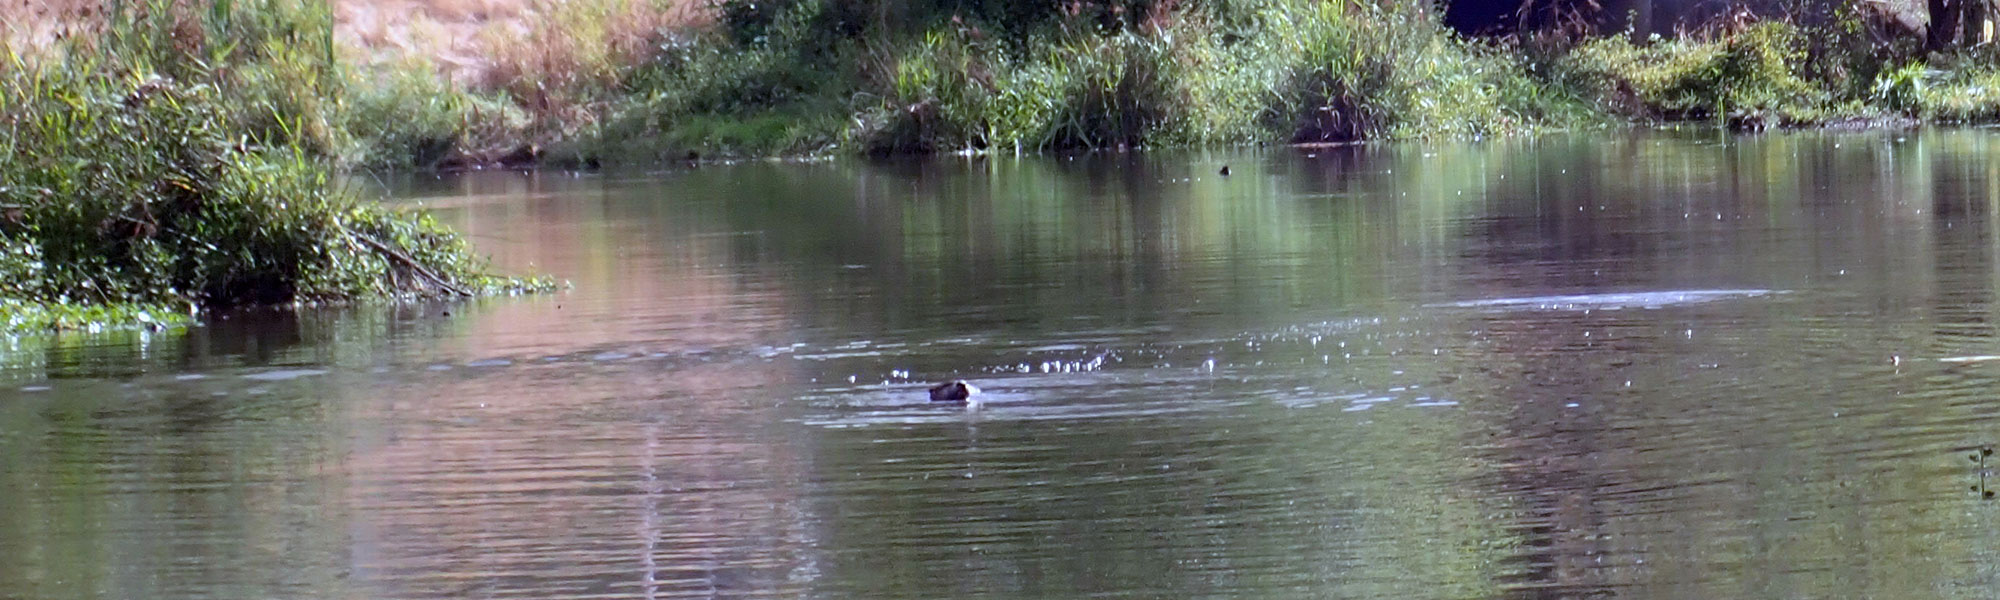 Otters in River